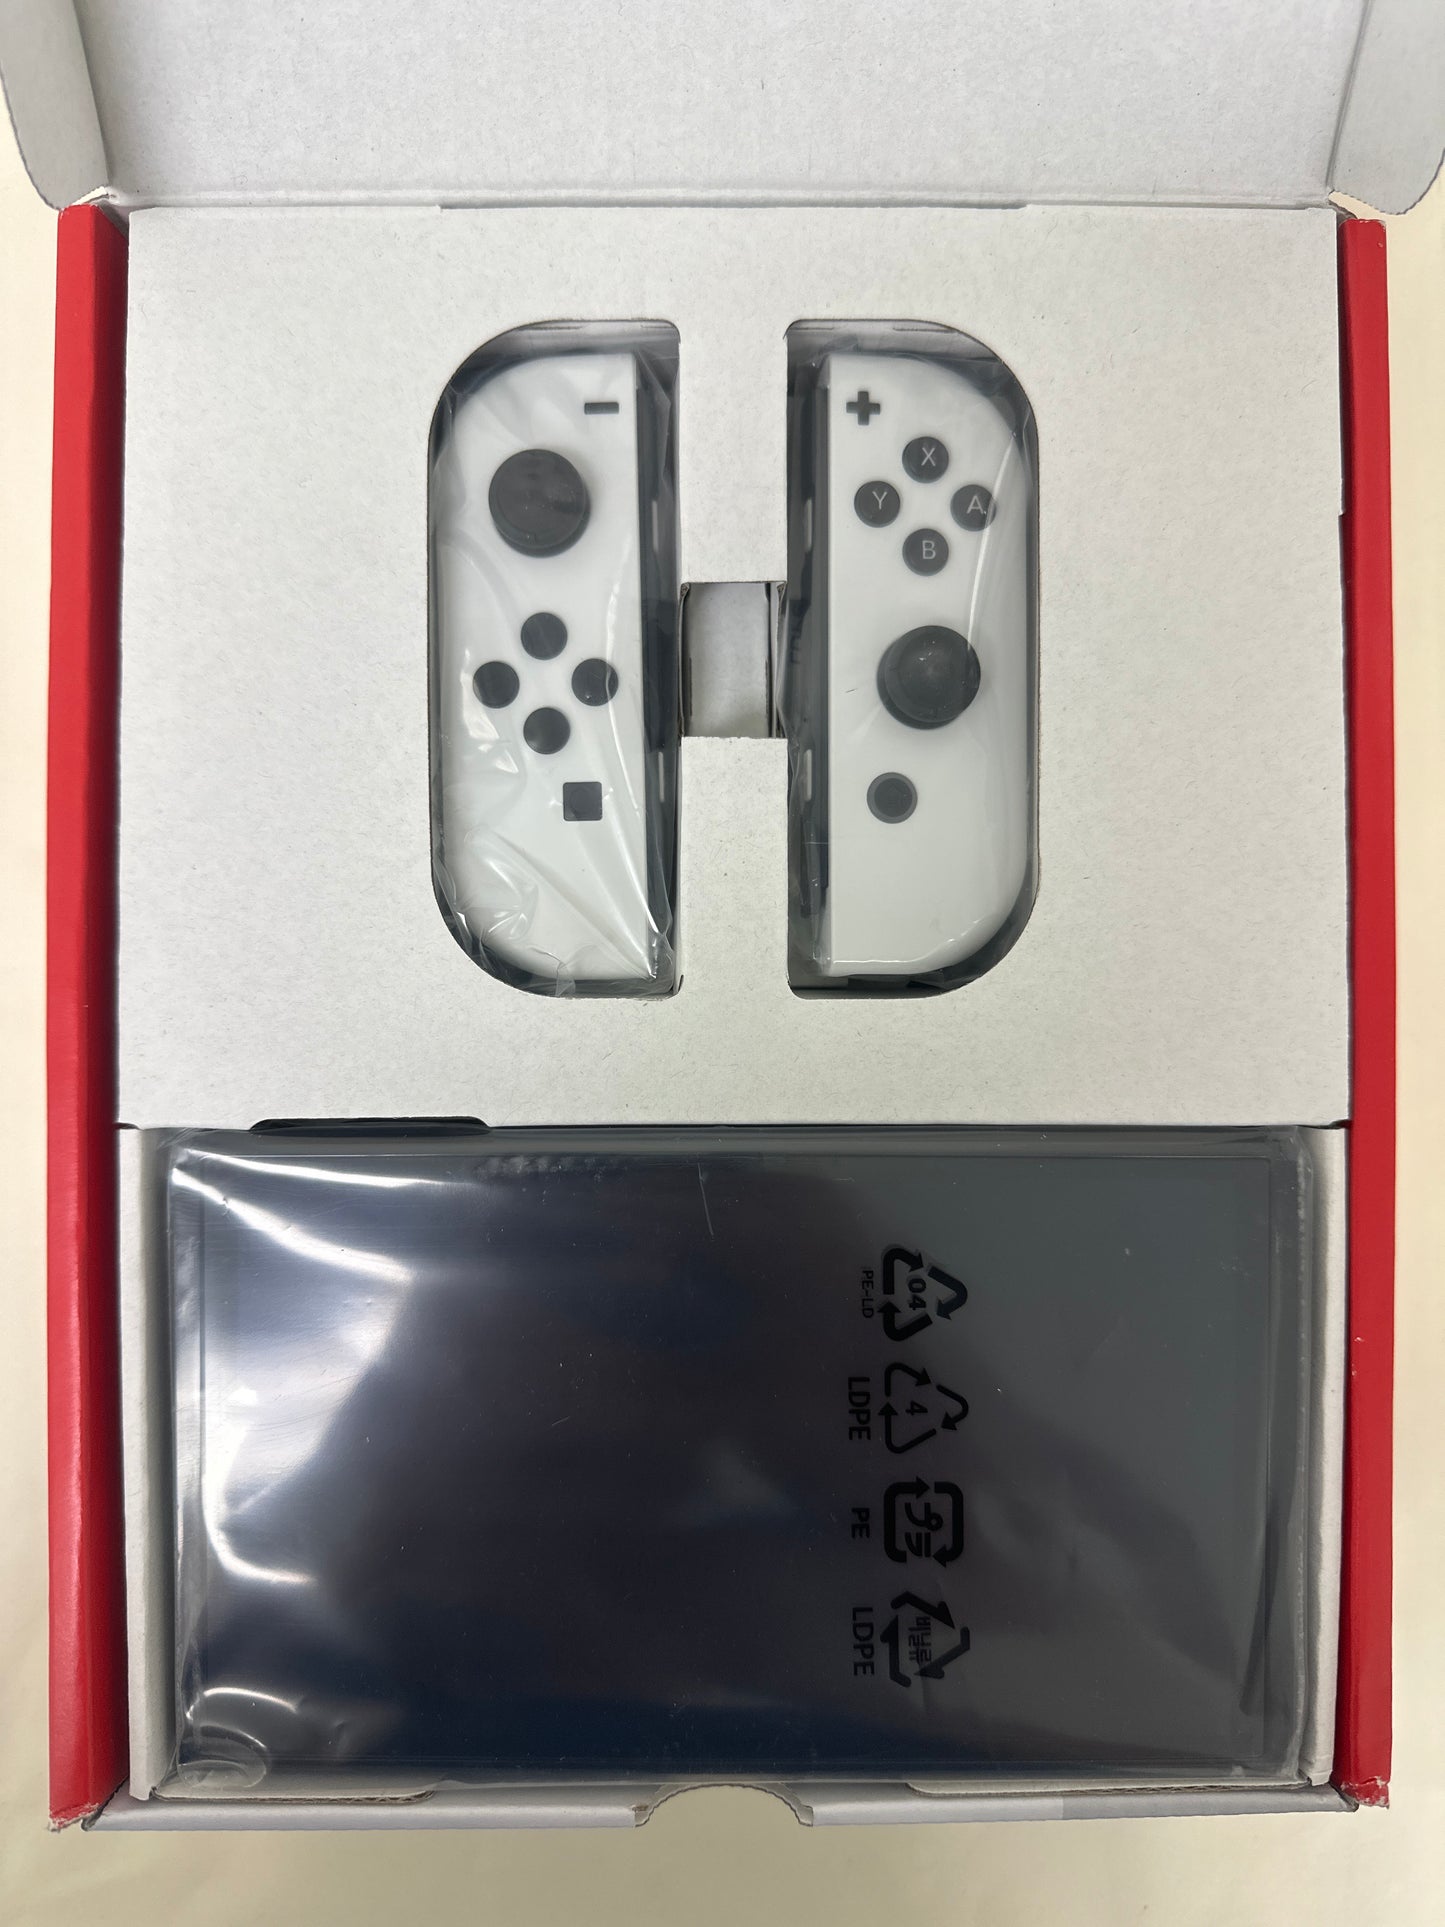 New Open Box Nintendo Switch OLED Video Game Console HEG-001 Black/White JP